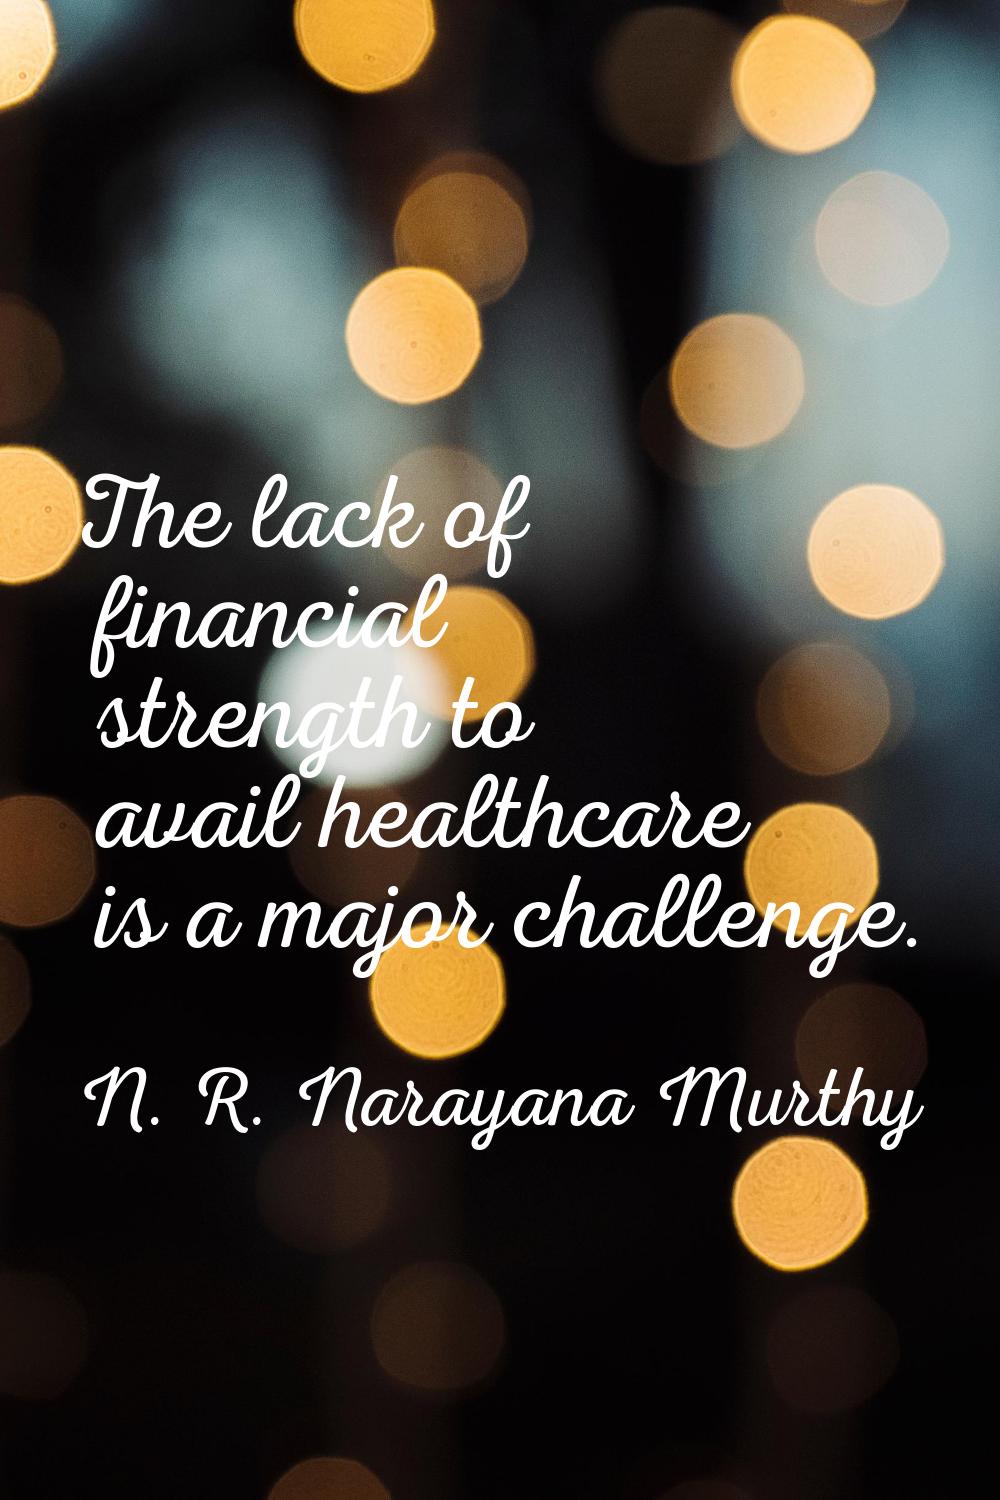 The lack of financial strength to avail healthcare is a major challenge.